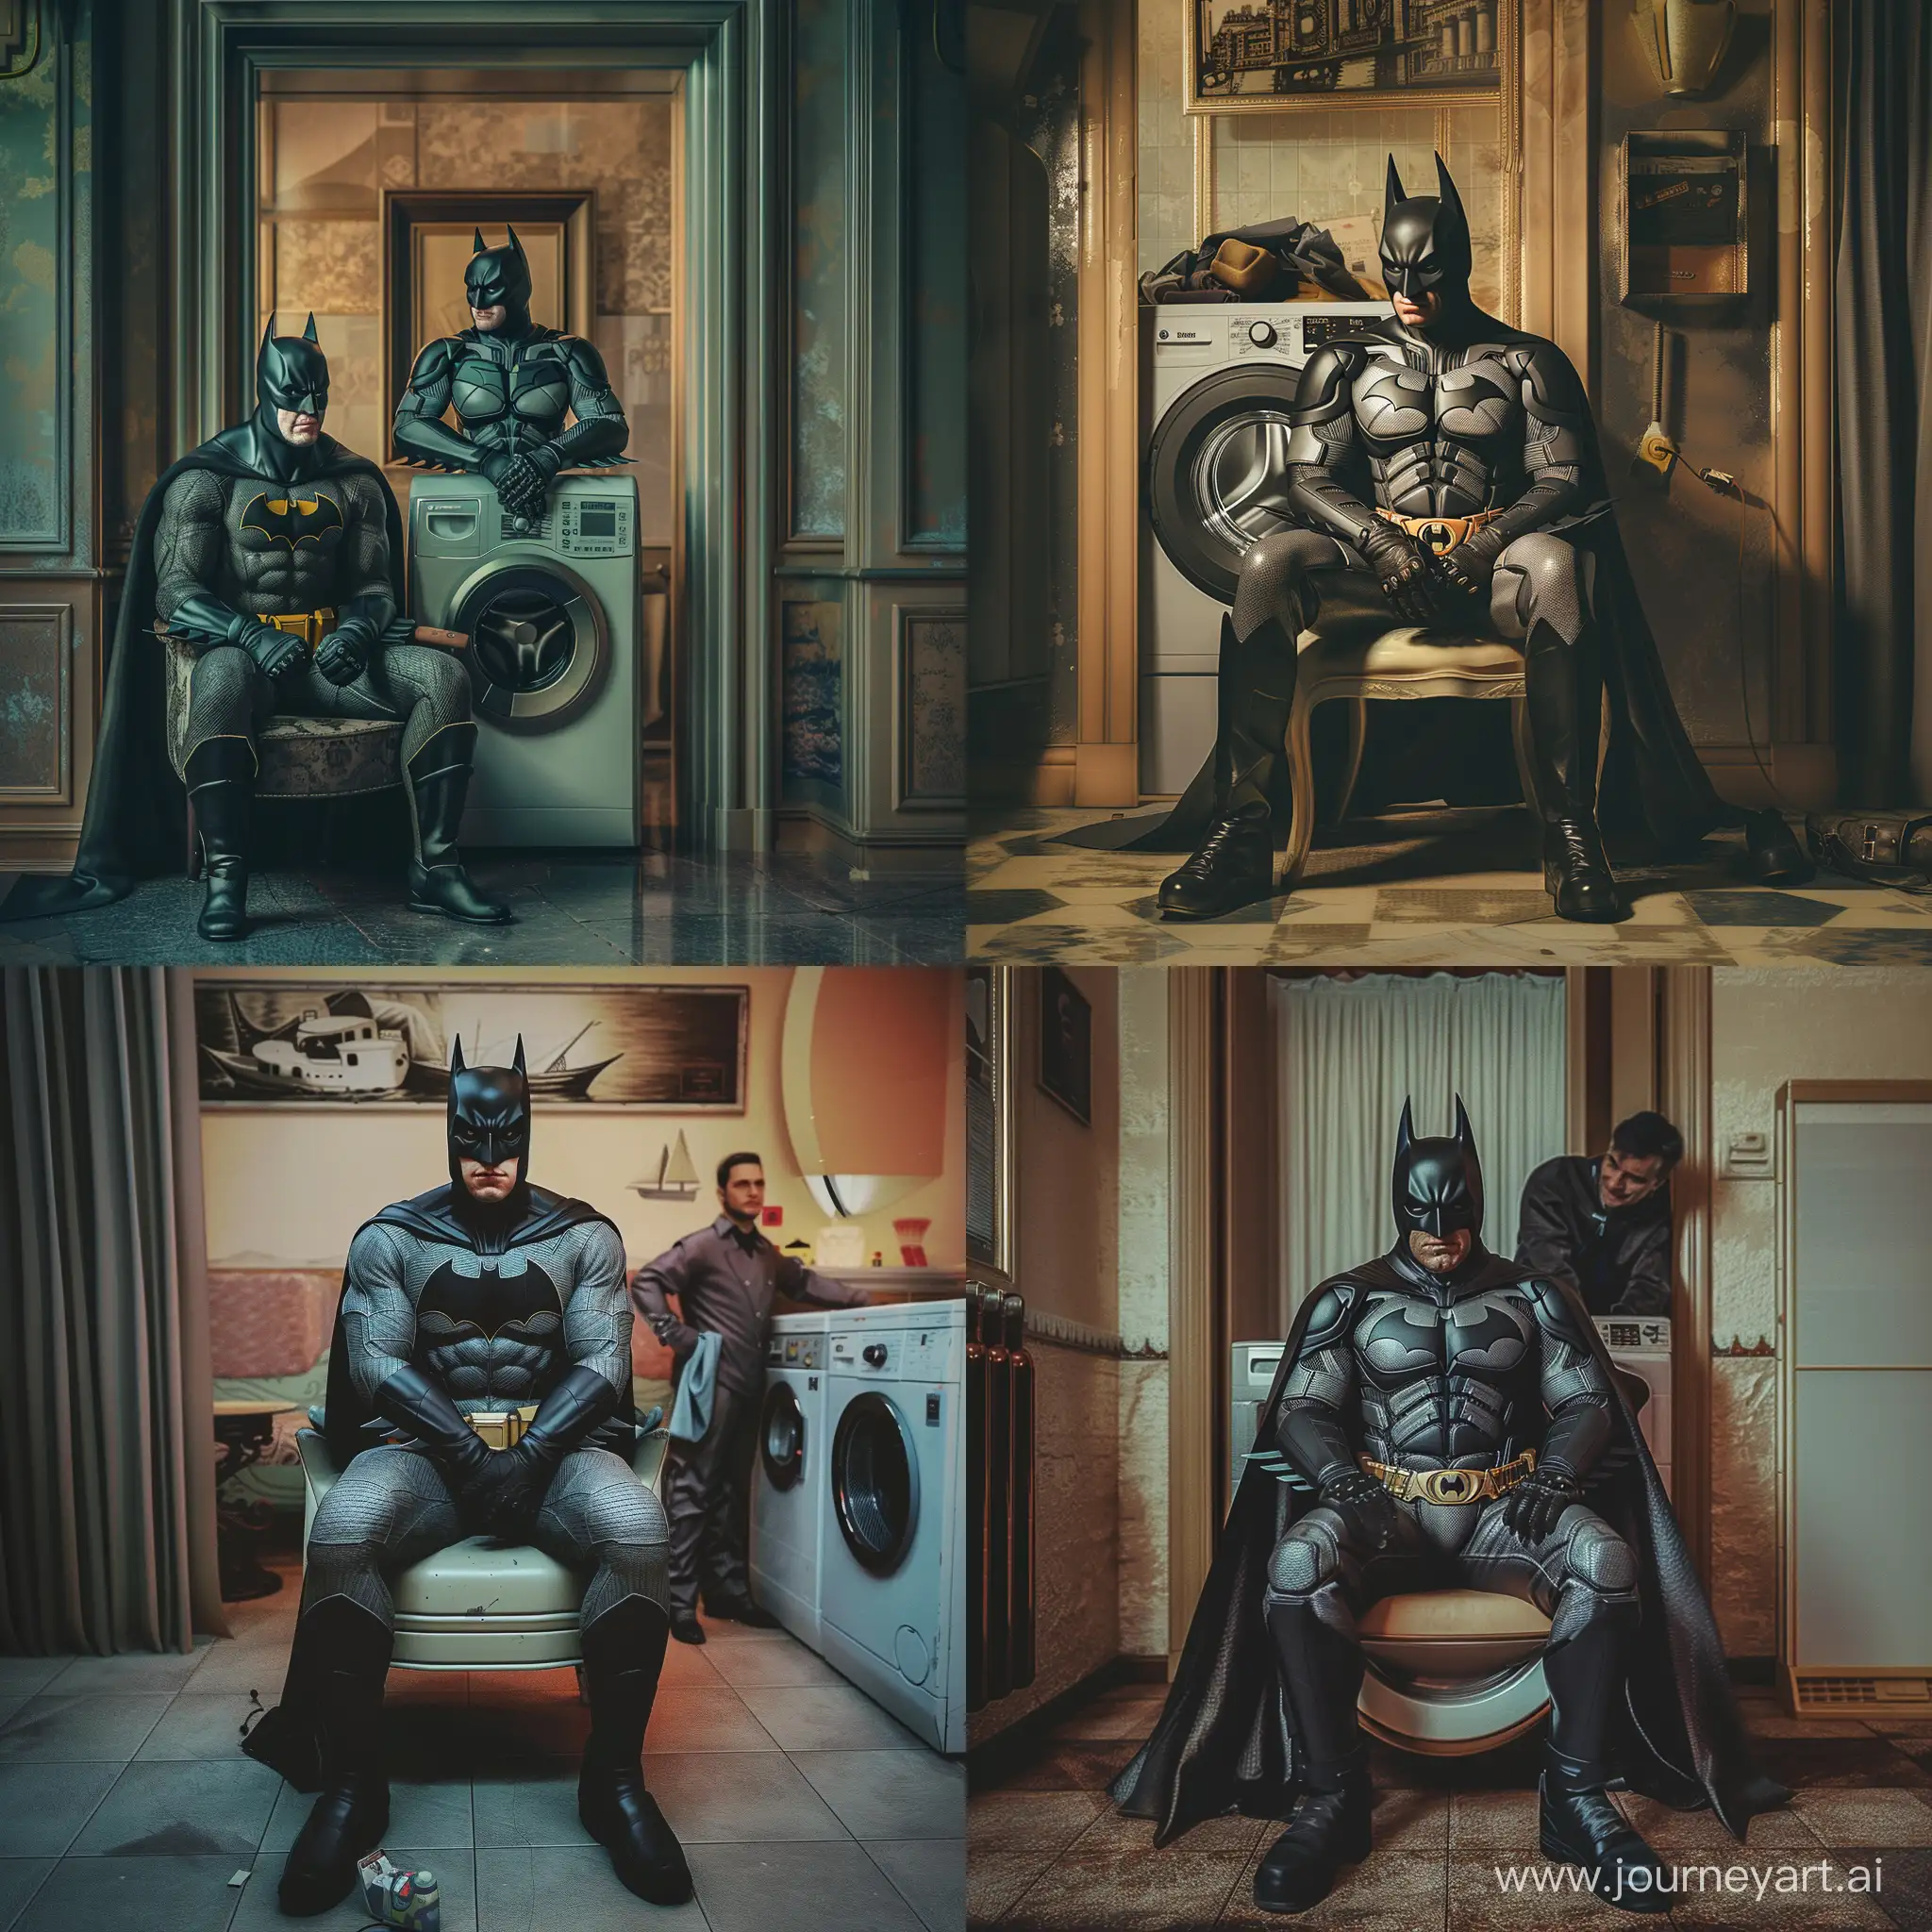 Batman DC sitting on a chair waiting for the repairman of his washing machine to finish his work, looking at the camera and smiling. Behind him is an image of a hotel room, high quality, super real, with calm colors